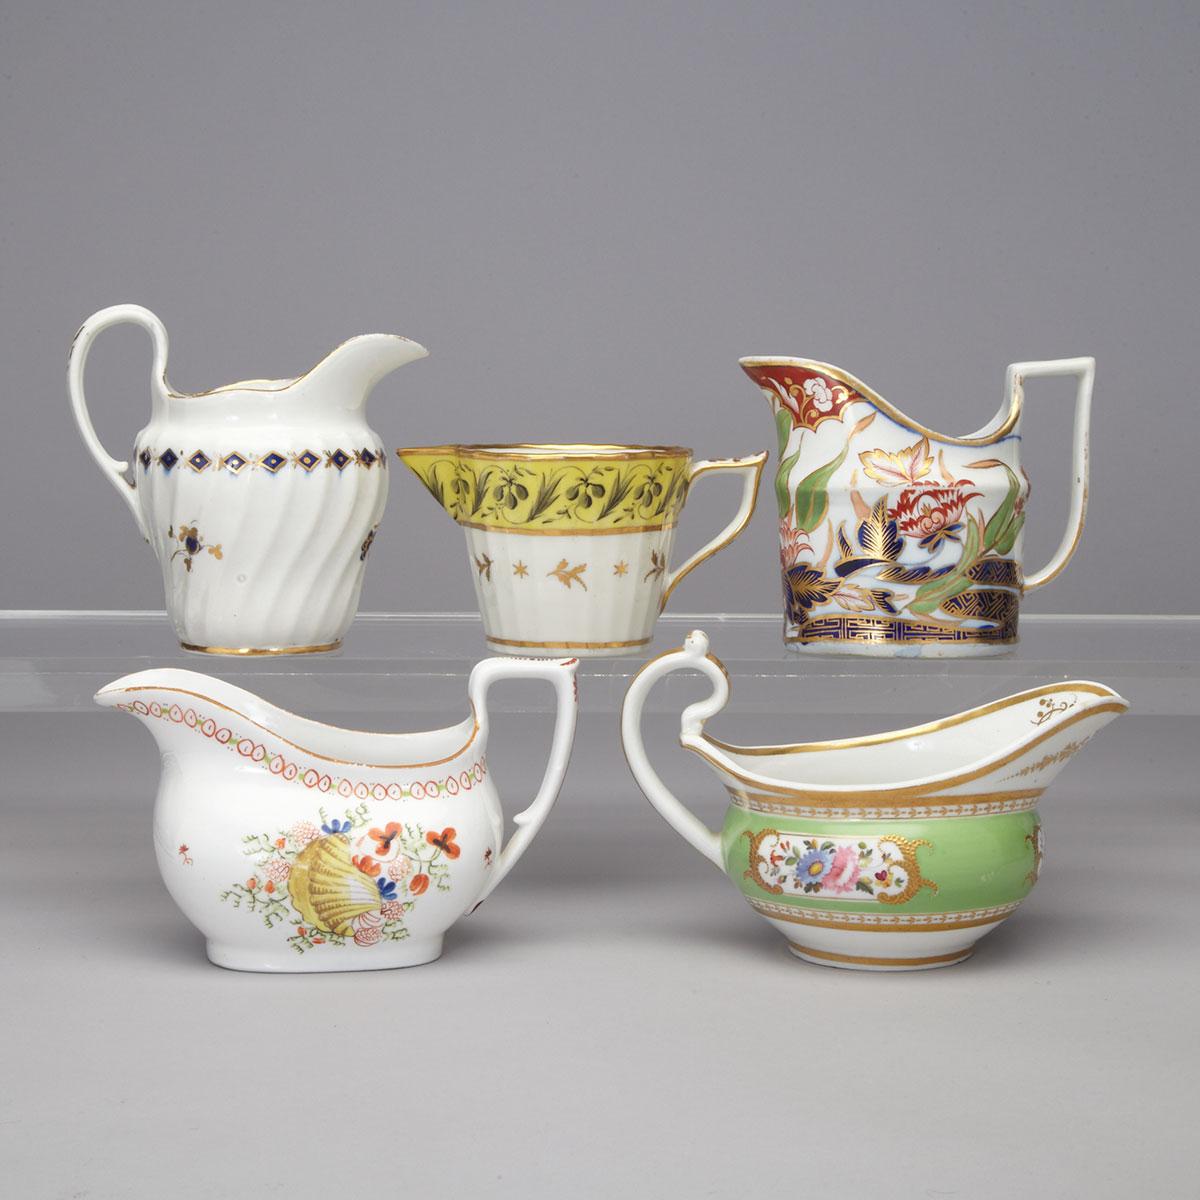 Group of Five English Porcelain Cream Jugs, late 18th/early 19th century